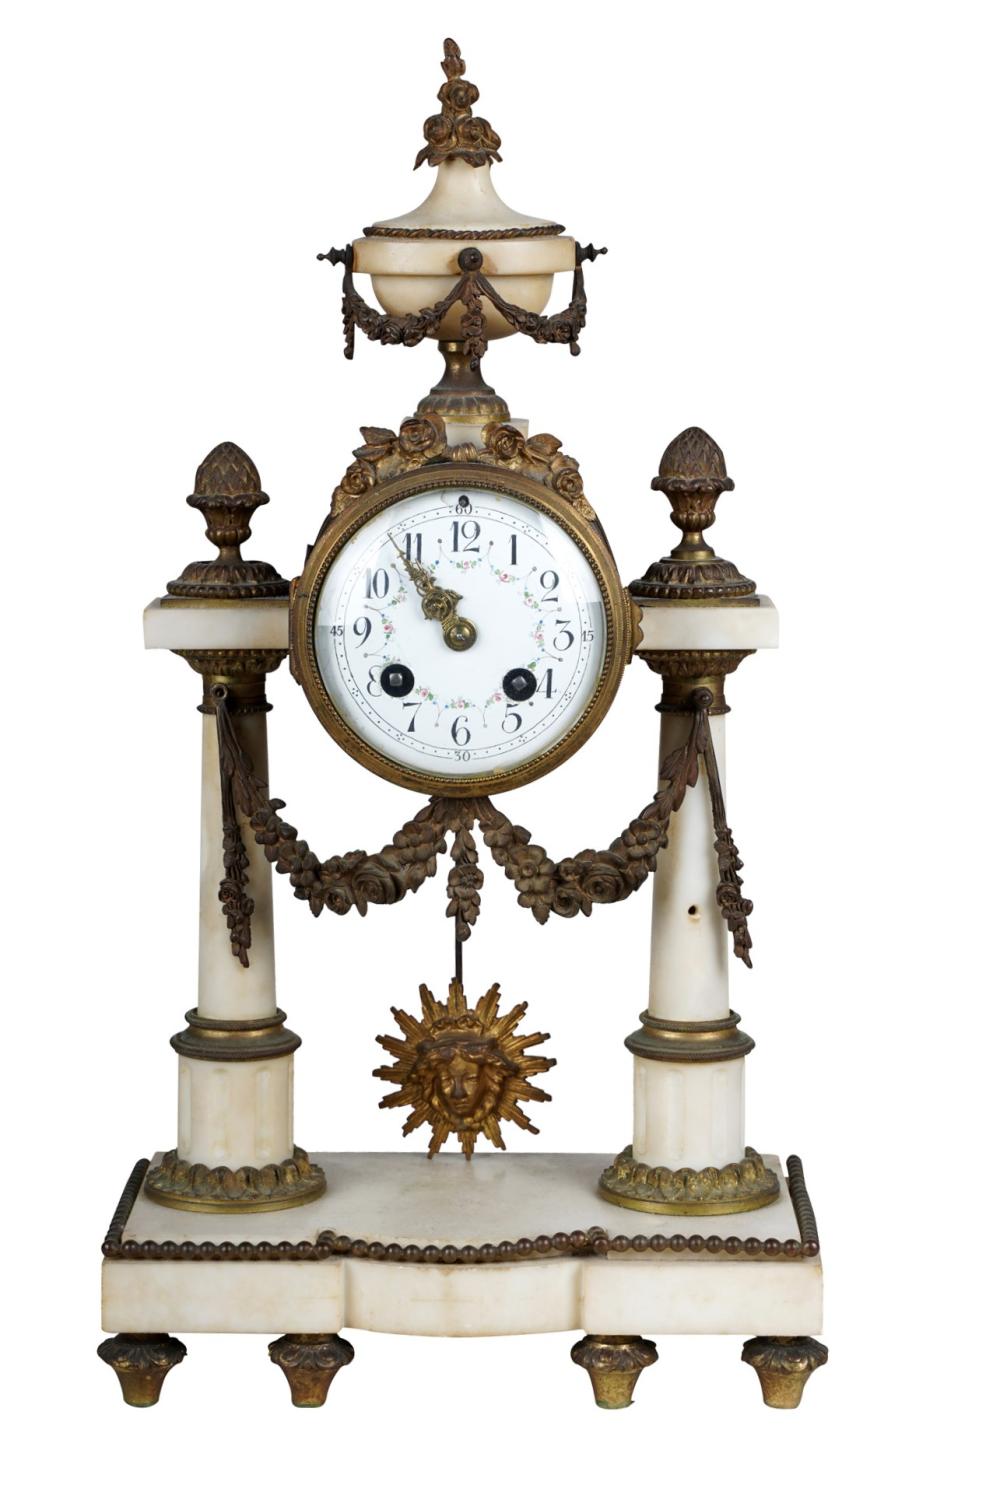 ONYX MANTLE CLOCK19th century apparently